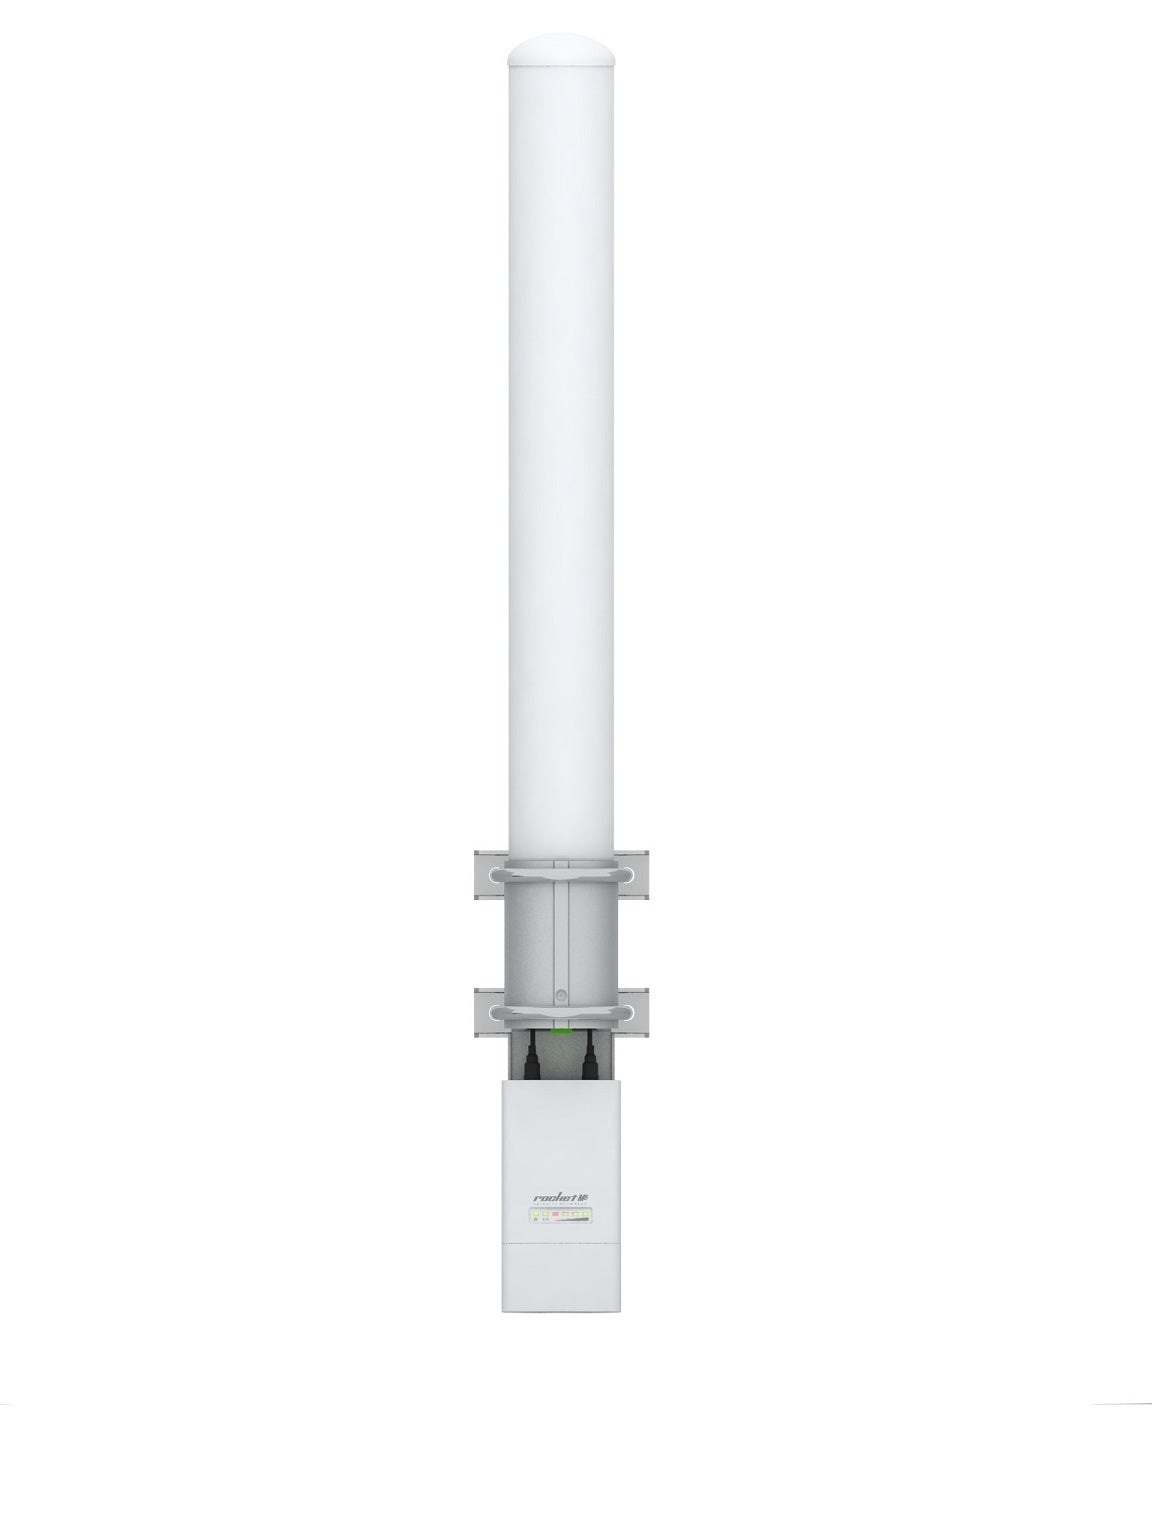 Ubiquiti 5GHz AirMax Dual Omni Directional 13dBi Antenna - All Mounting Accessories Brackets Included, Incl 2Yr Warr AMO-5G13